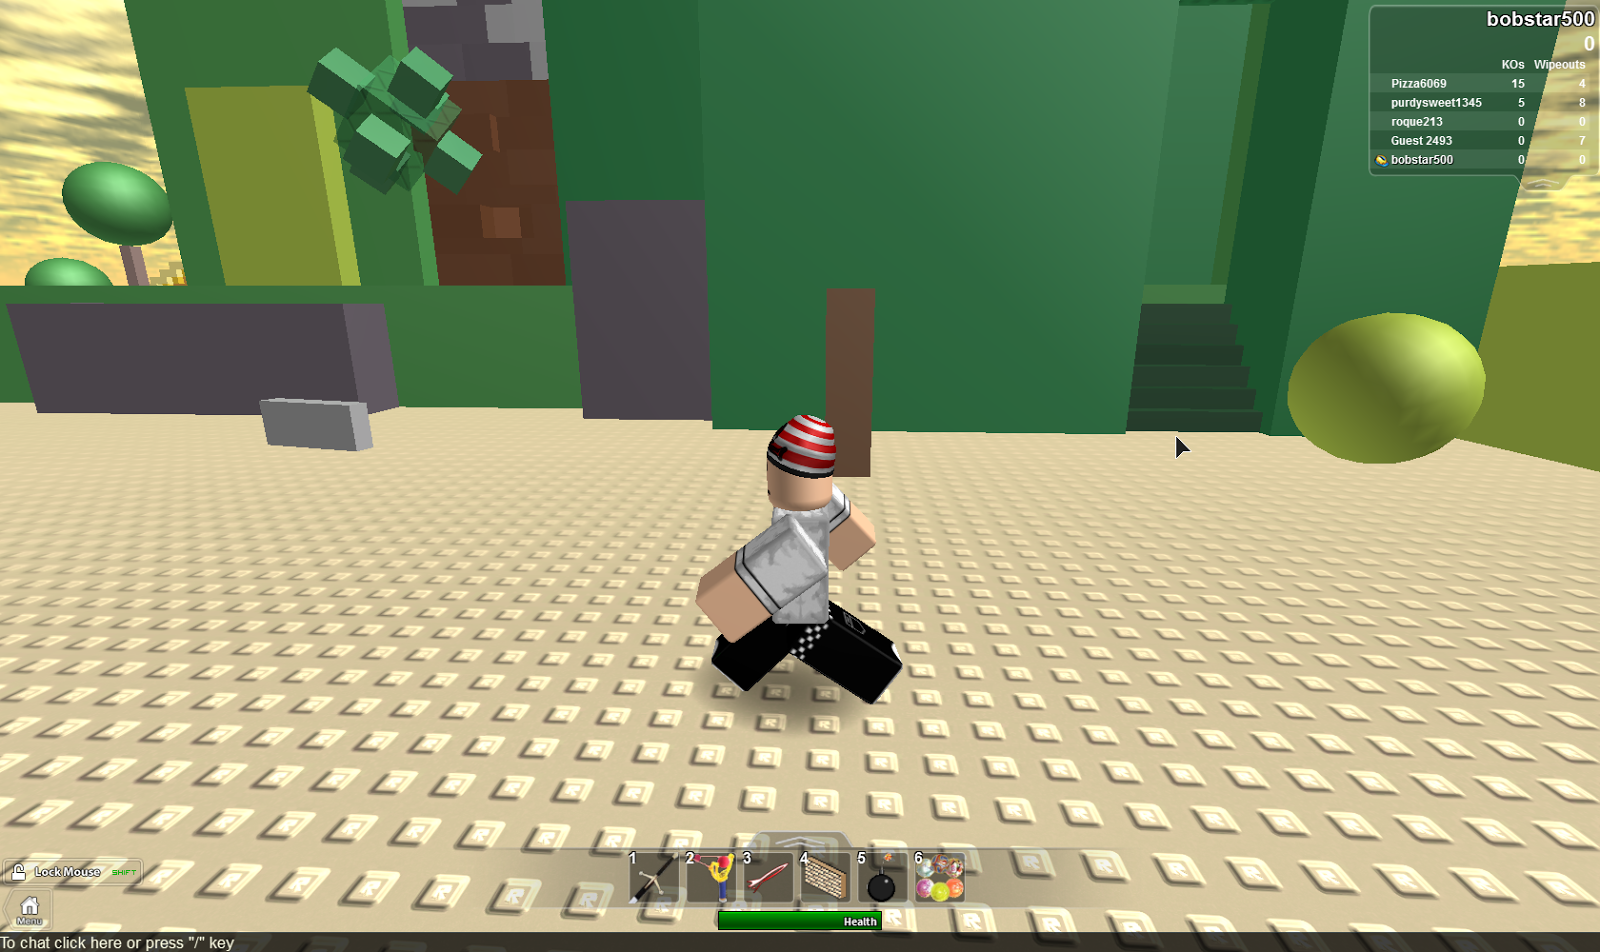 Unofficial Roblox New Roblox Character Animations A Bad Update - character roblox animation pictures